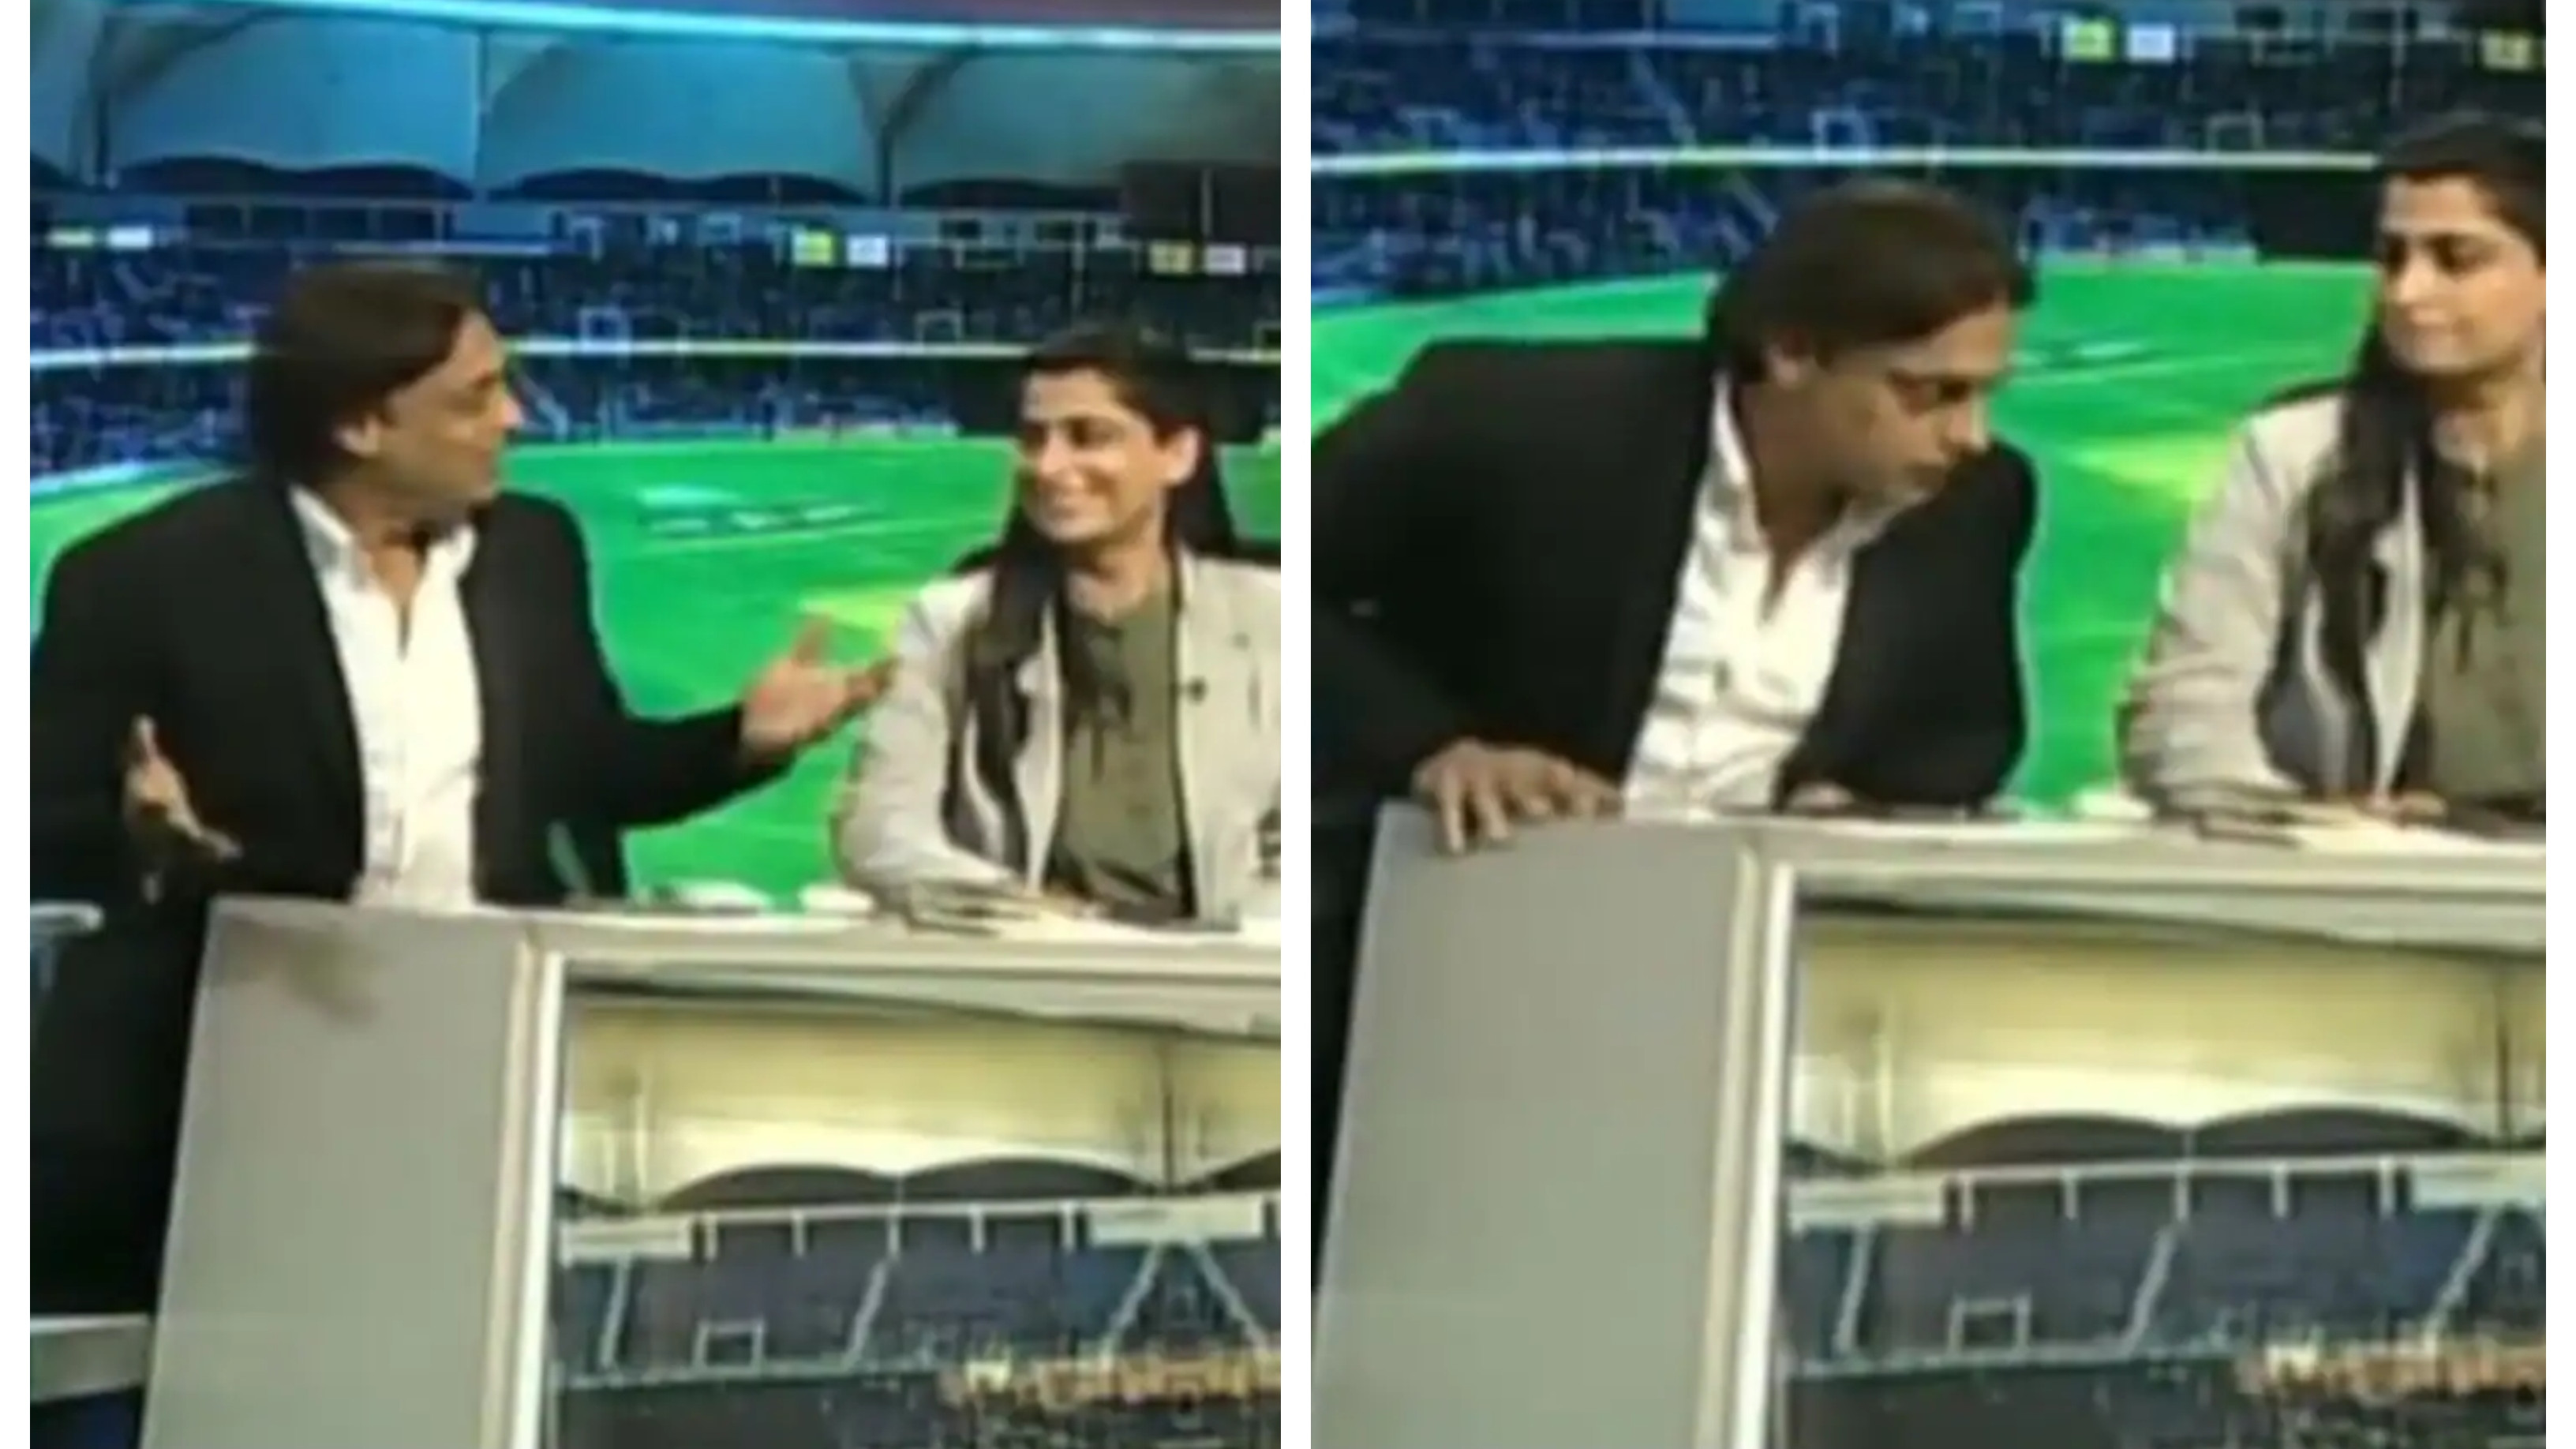 WATCH: Shoaib Akhtar walks out of TV show after being asked to leave by the host; clarifies his position on Twitter